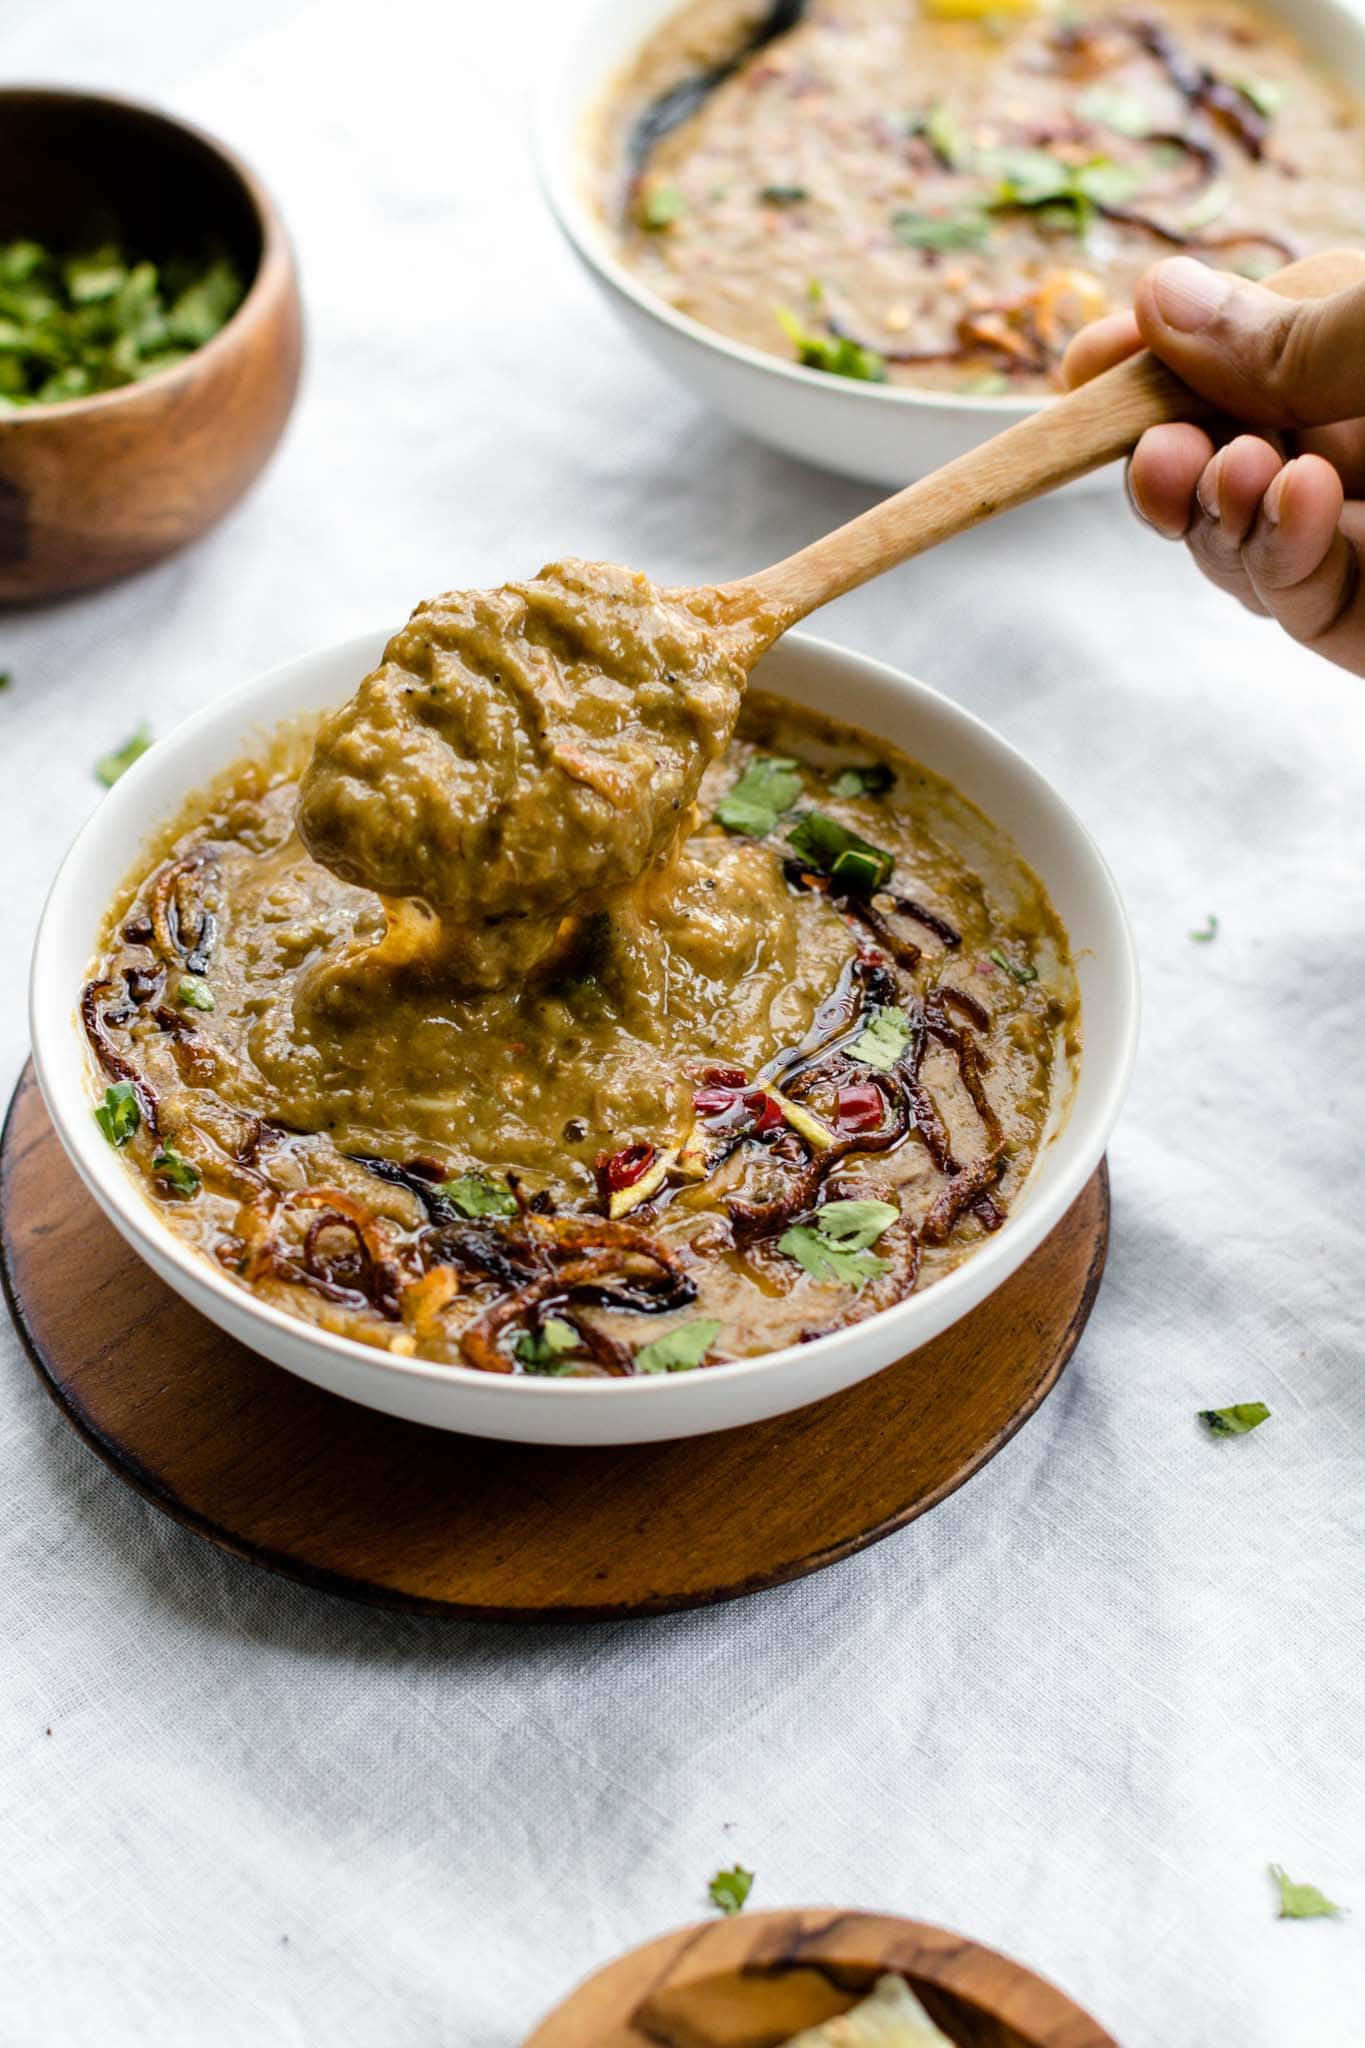 Scooping Haleem with a wooden spoon from a white bowl